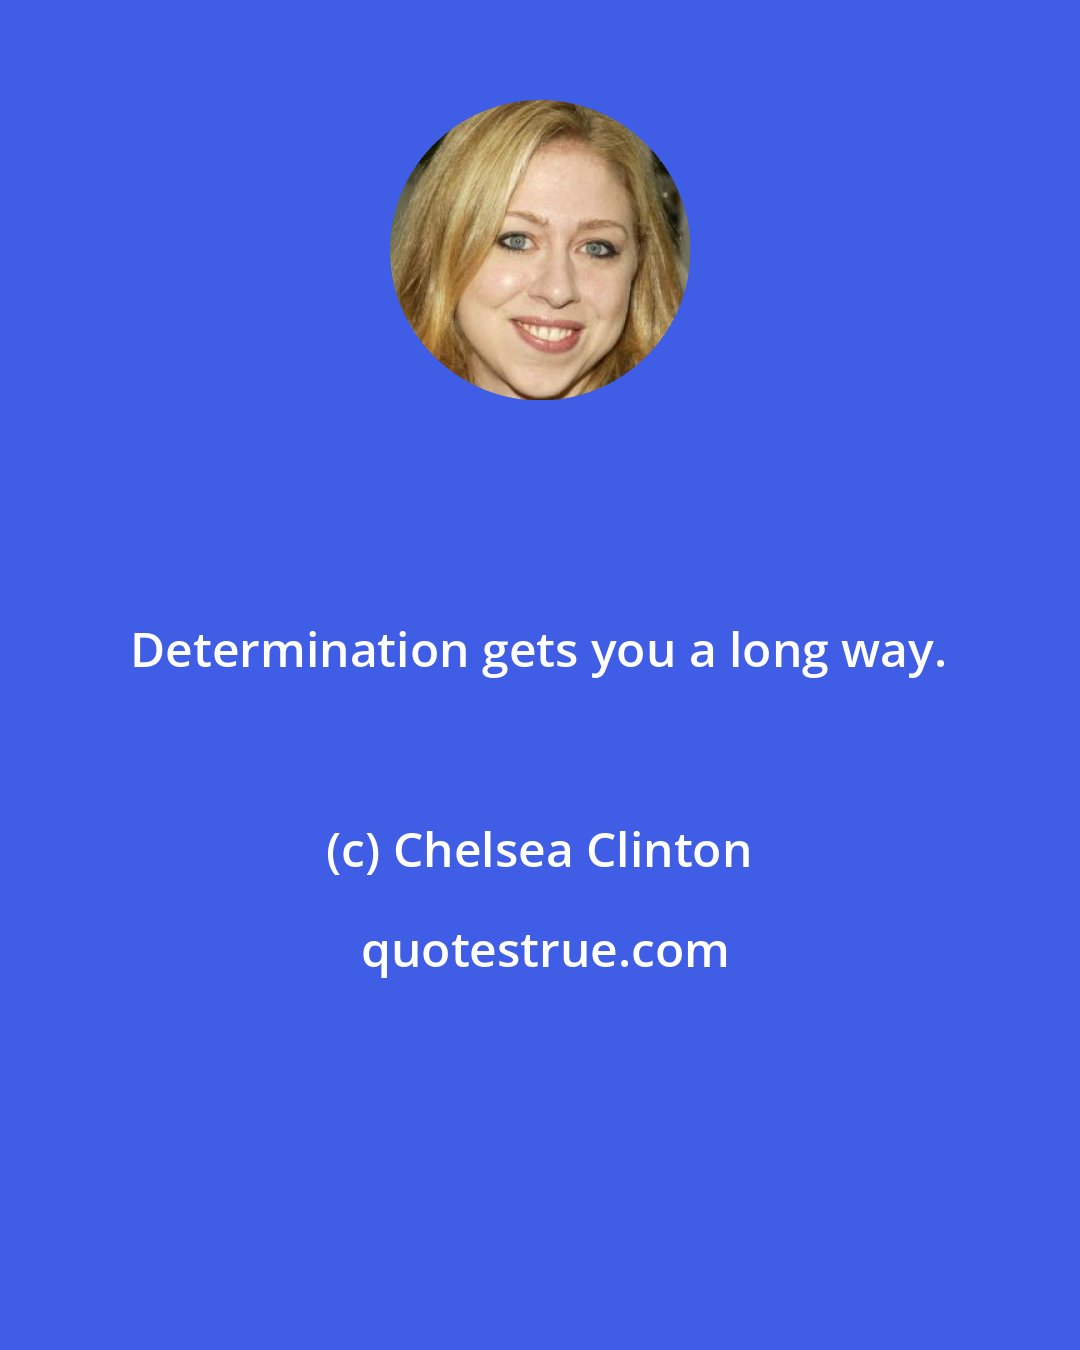 Chelsea Clinton: Determination gets you a long way.